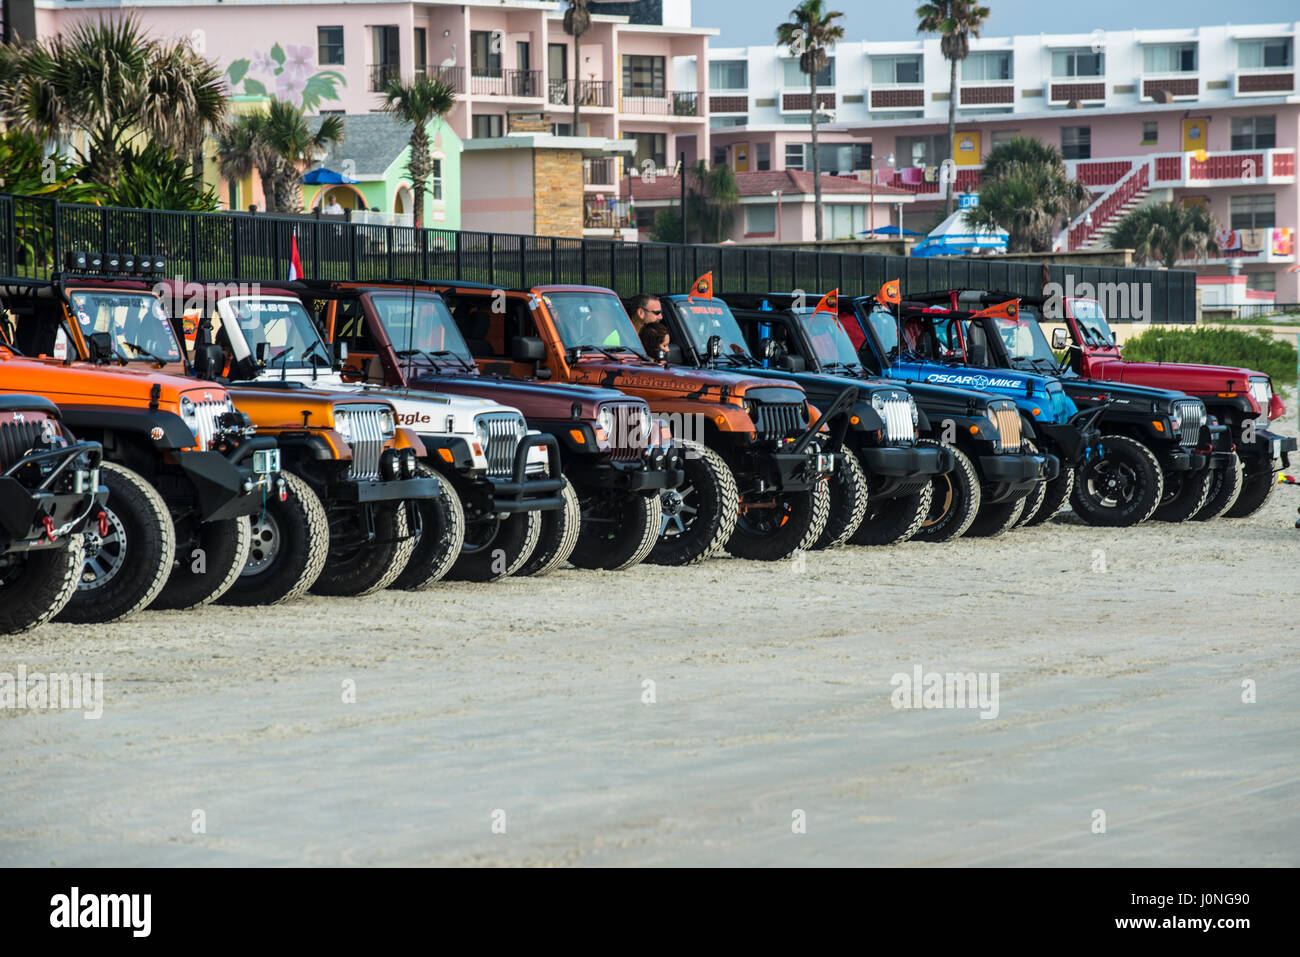 Jeep Week At Daytona Beach Thousands Of Jeeps On The Beach And On The Stock Photo Alamy